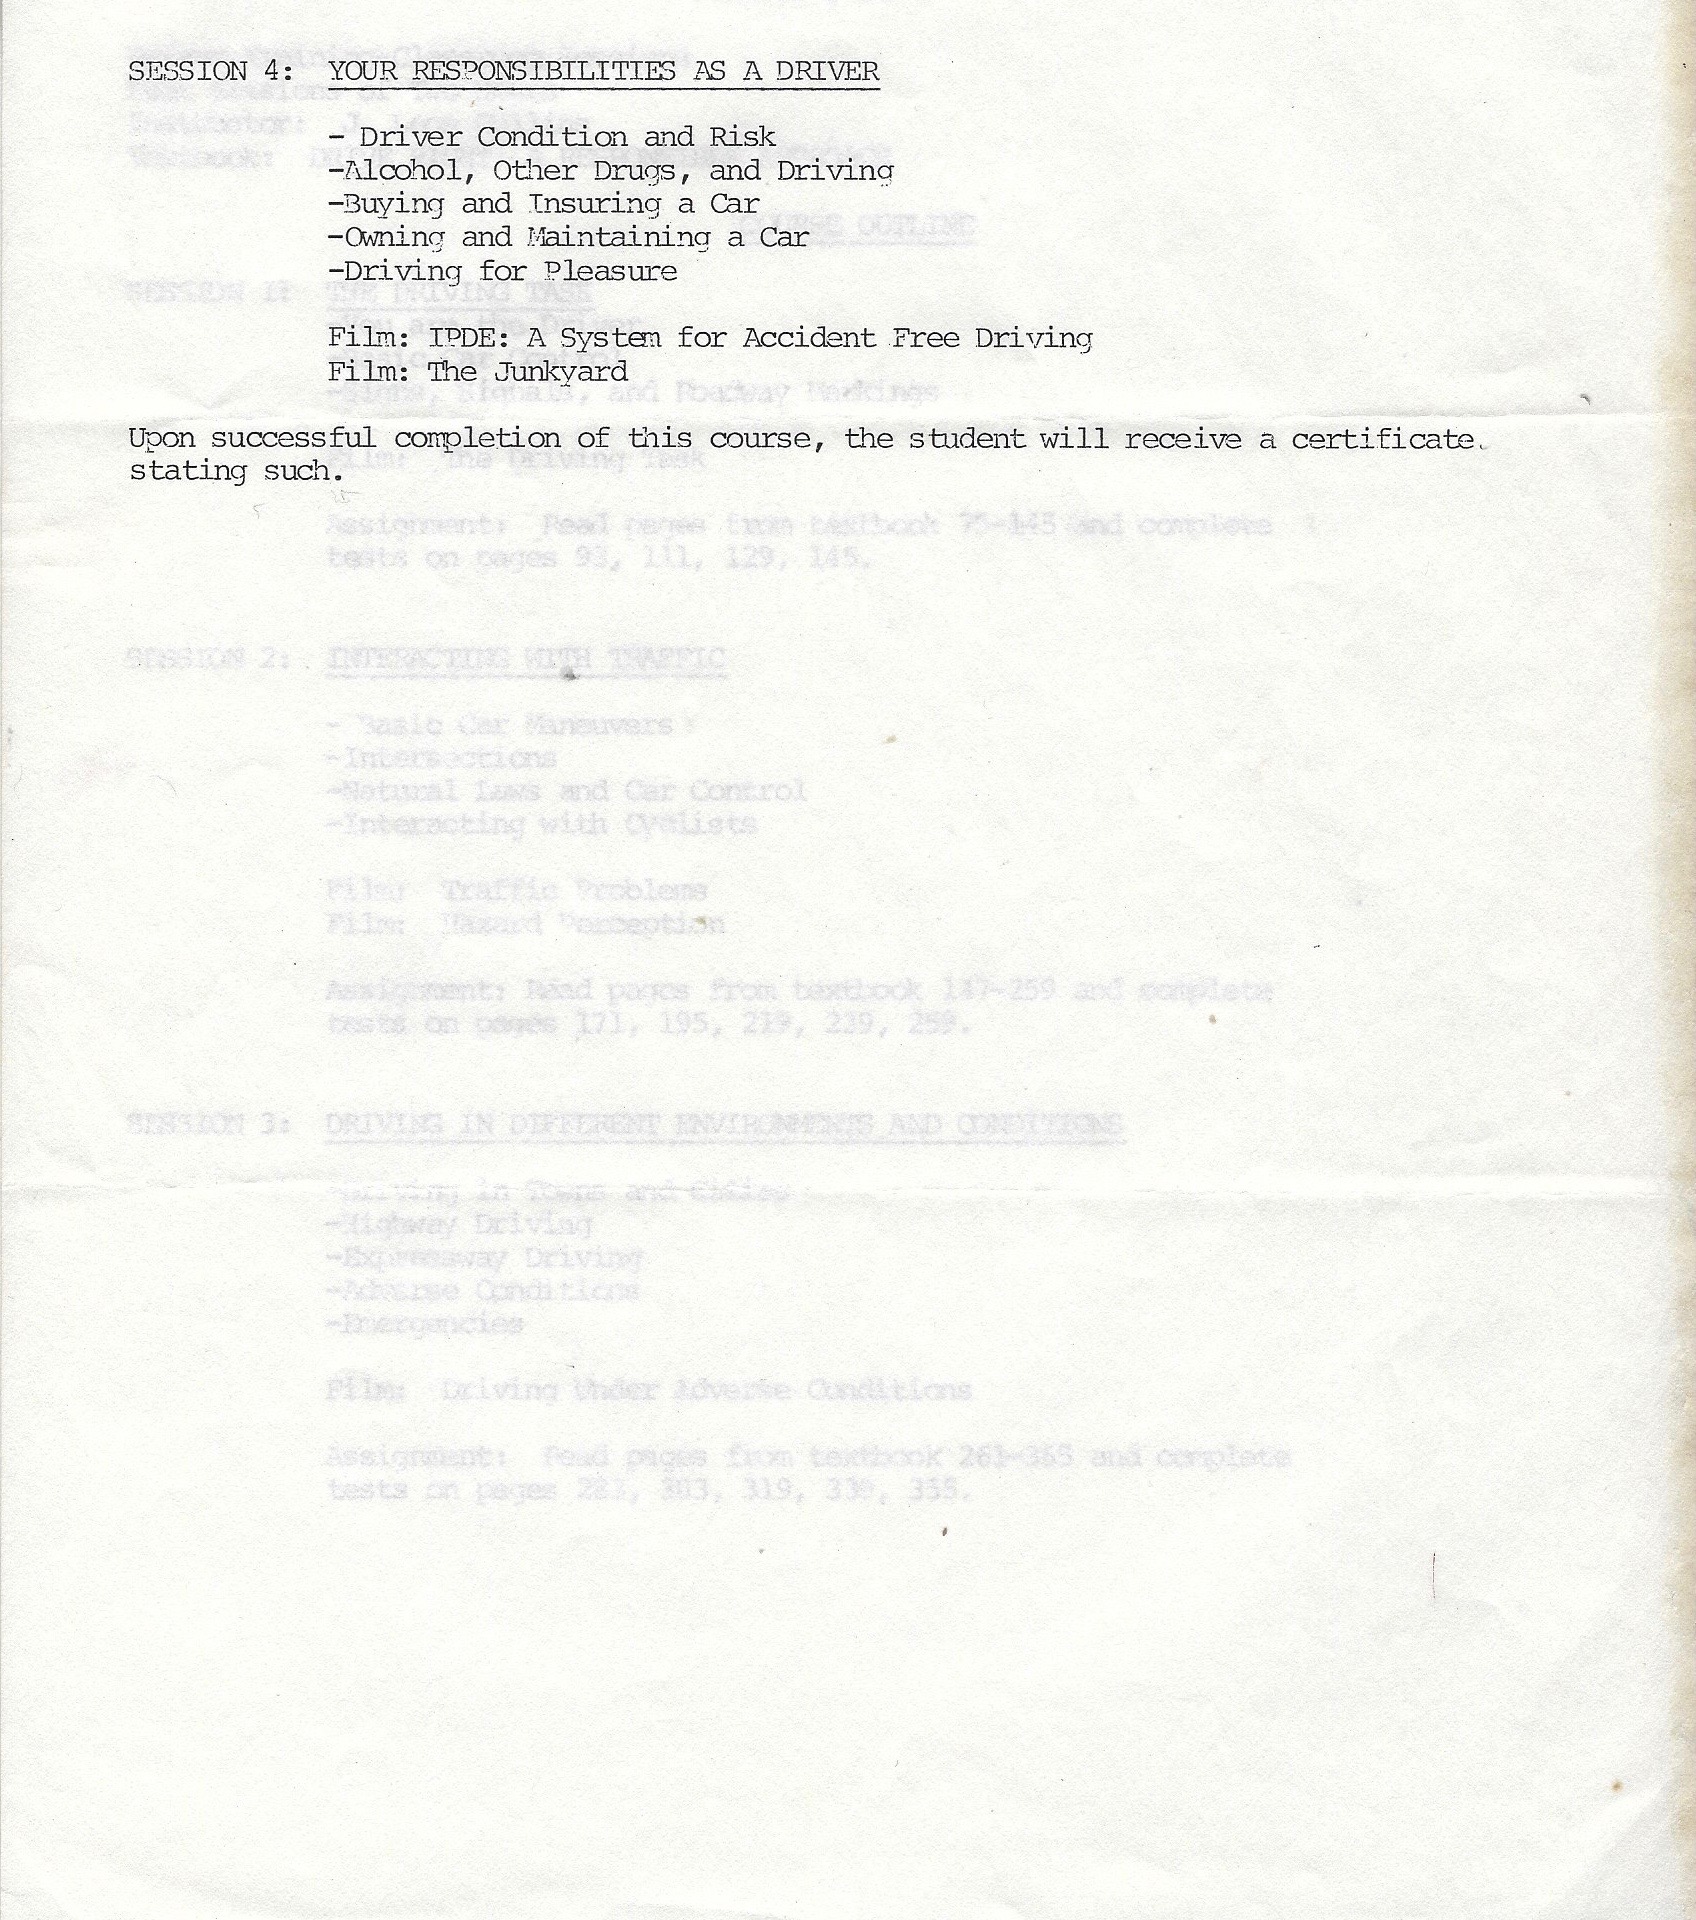 Original Course Outline for "Drive Right" 1991